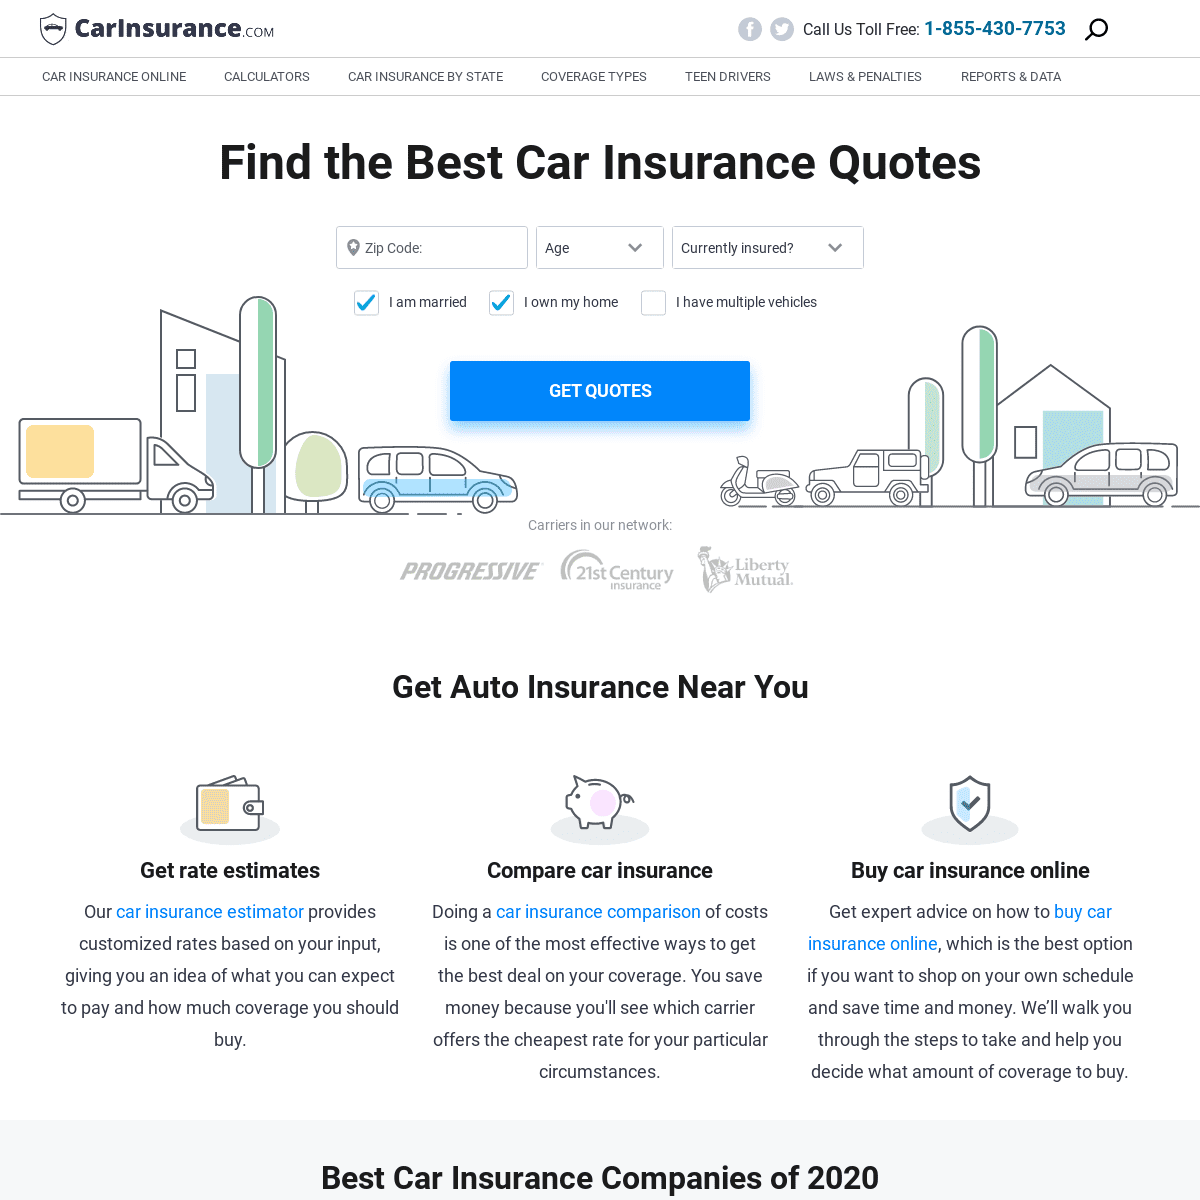 A complete backup of carinsurance.com